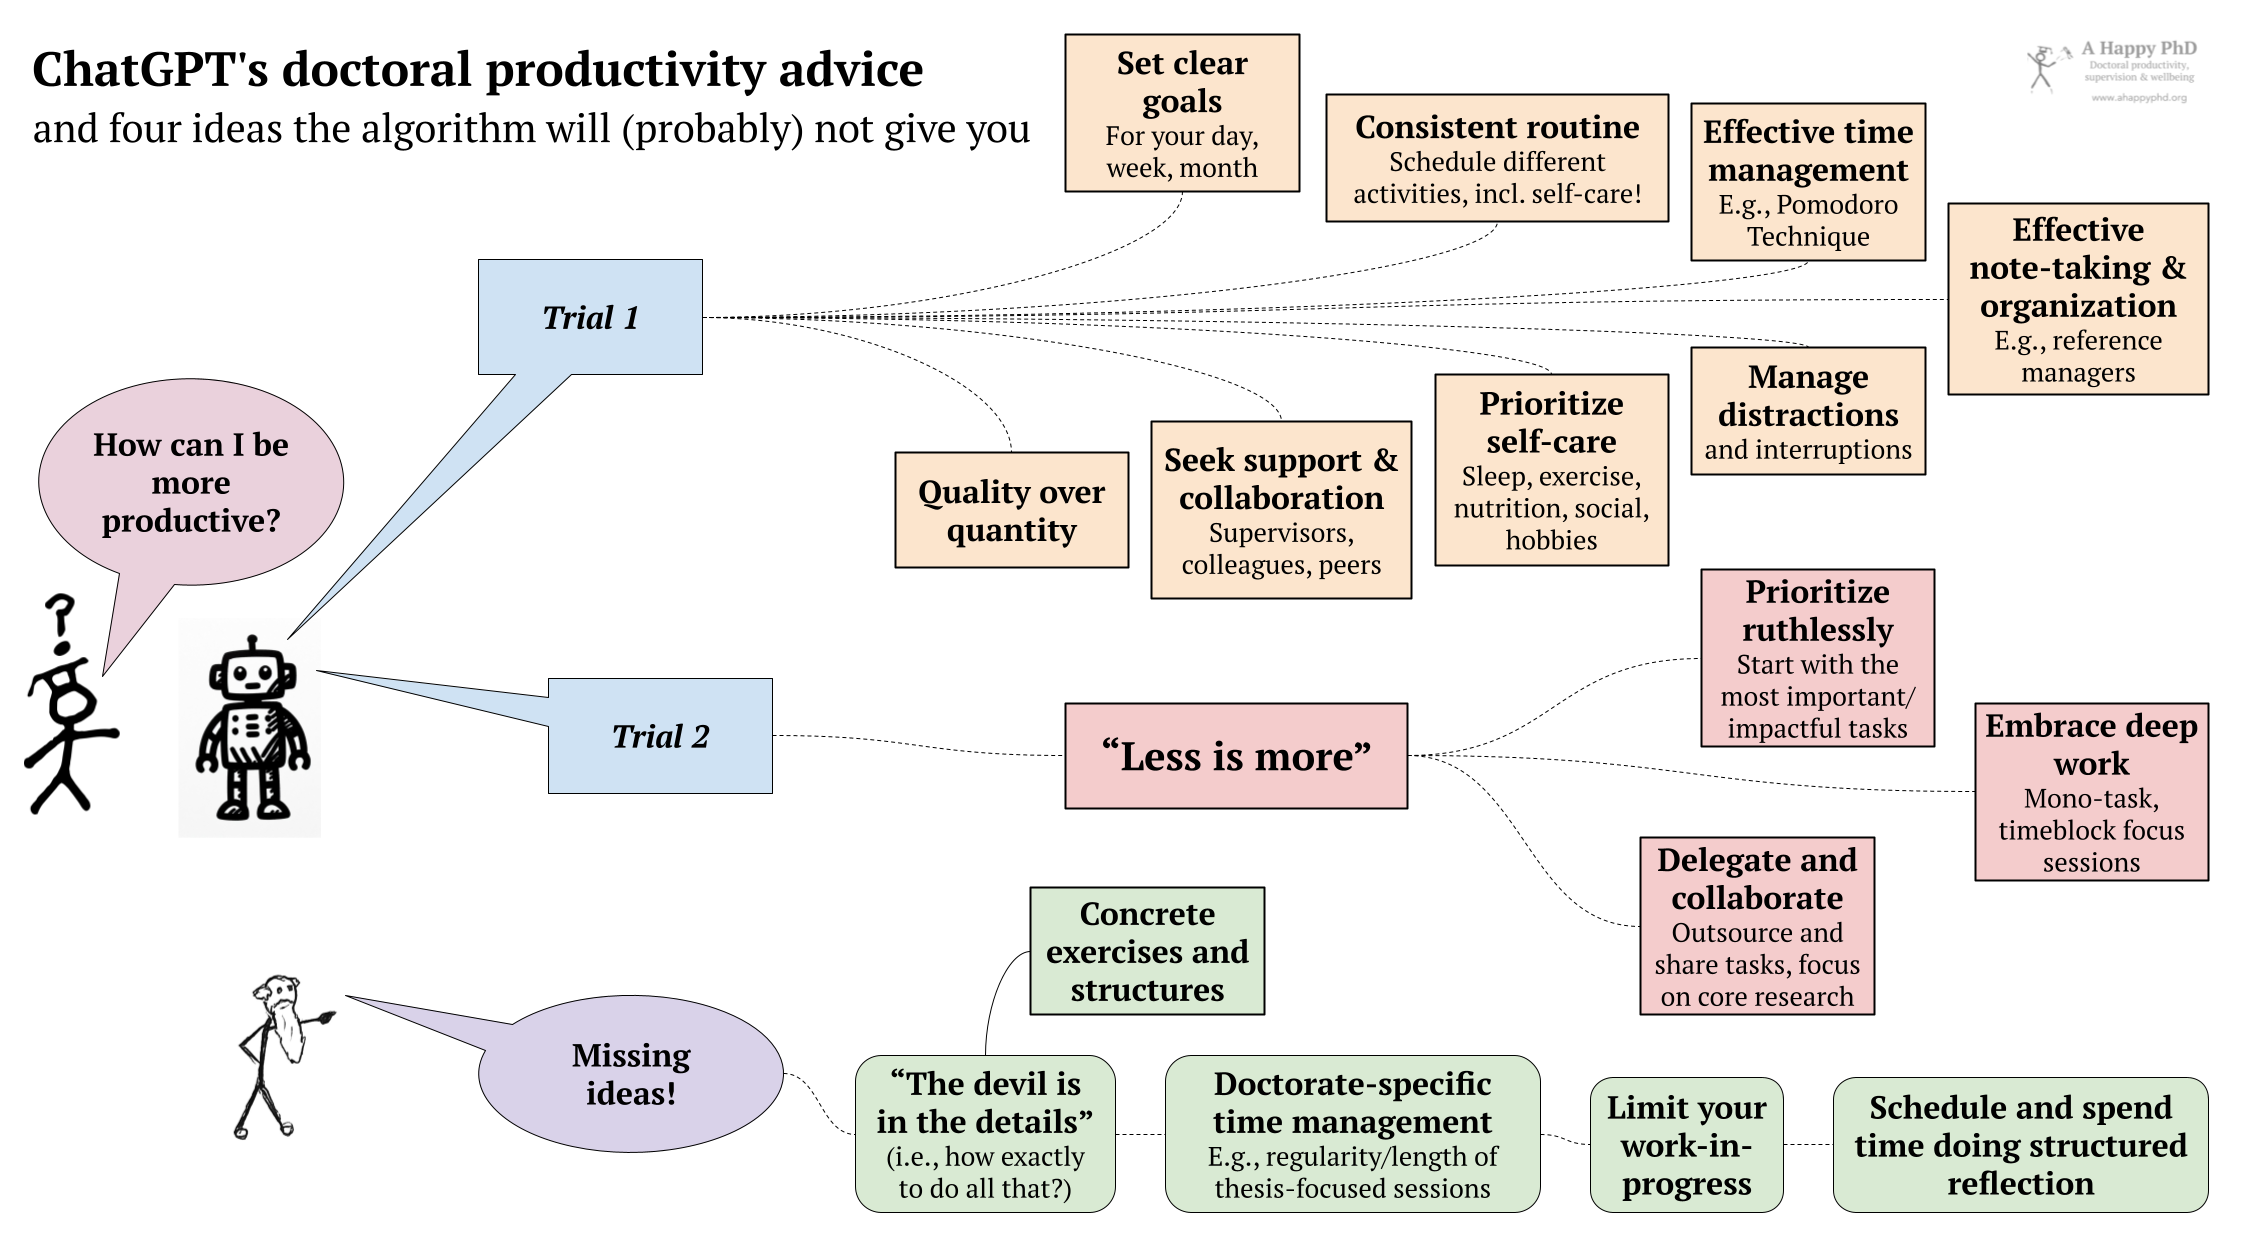 Eight areas of ChatGPT-generated productivity, a contrarian principle, and four missing pieces of productivity advice.